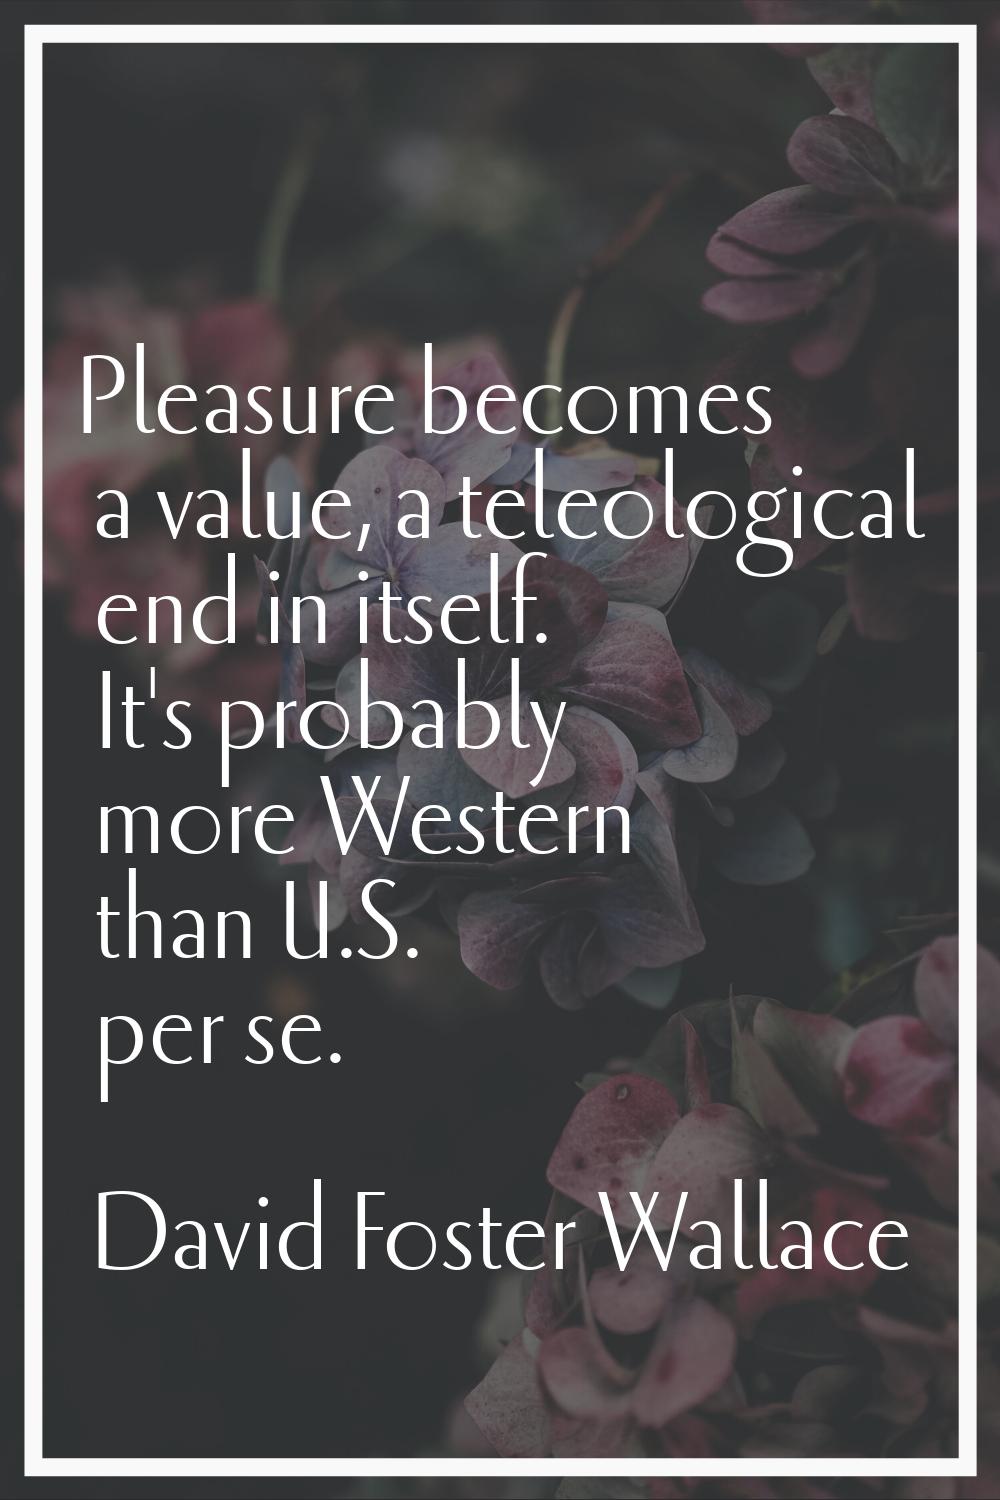 Pleasure becomes a value, a teleological end in itself. It's probably more Western than U.S. per se